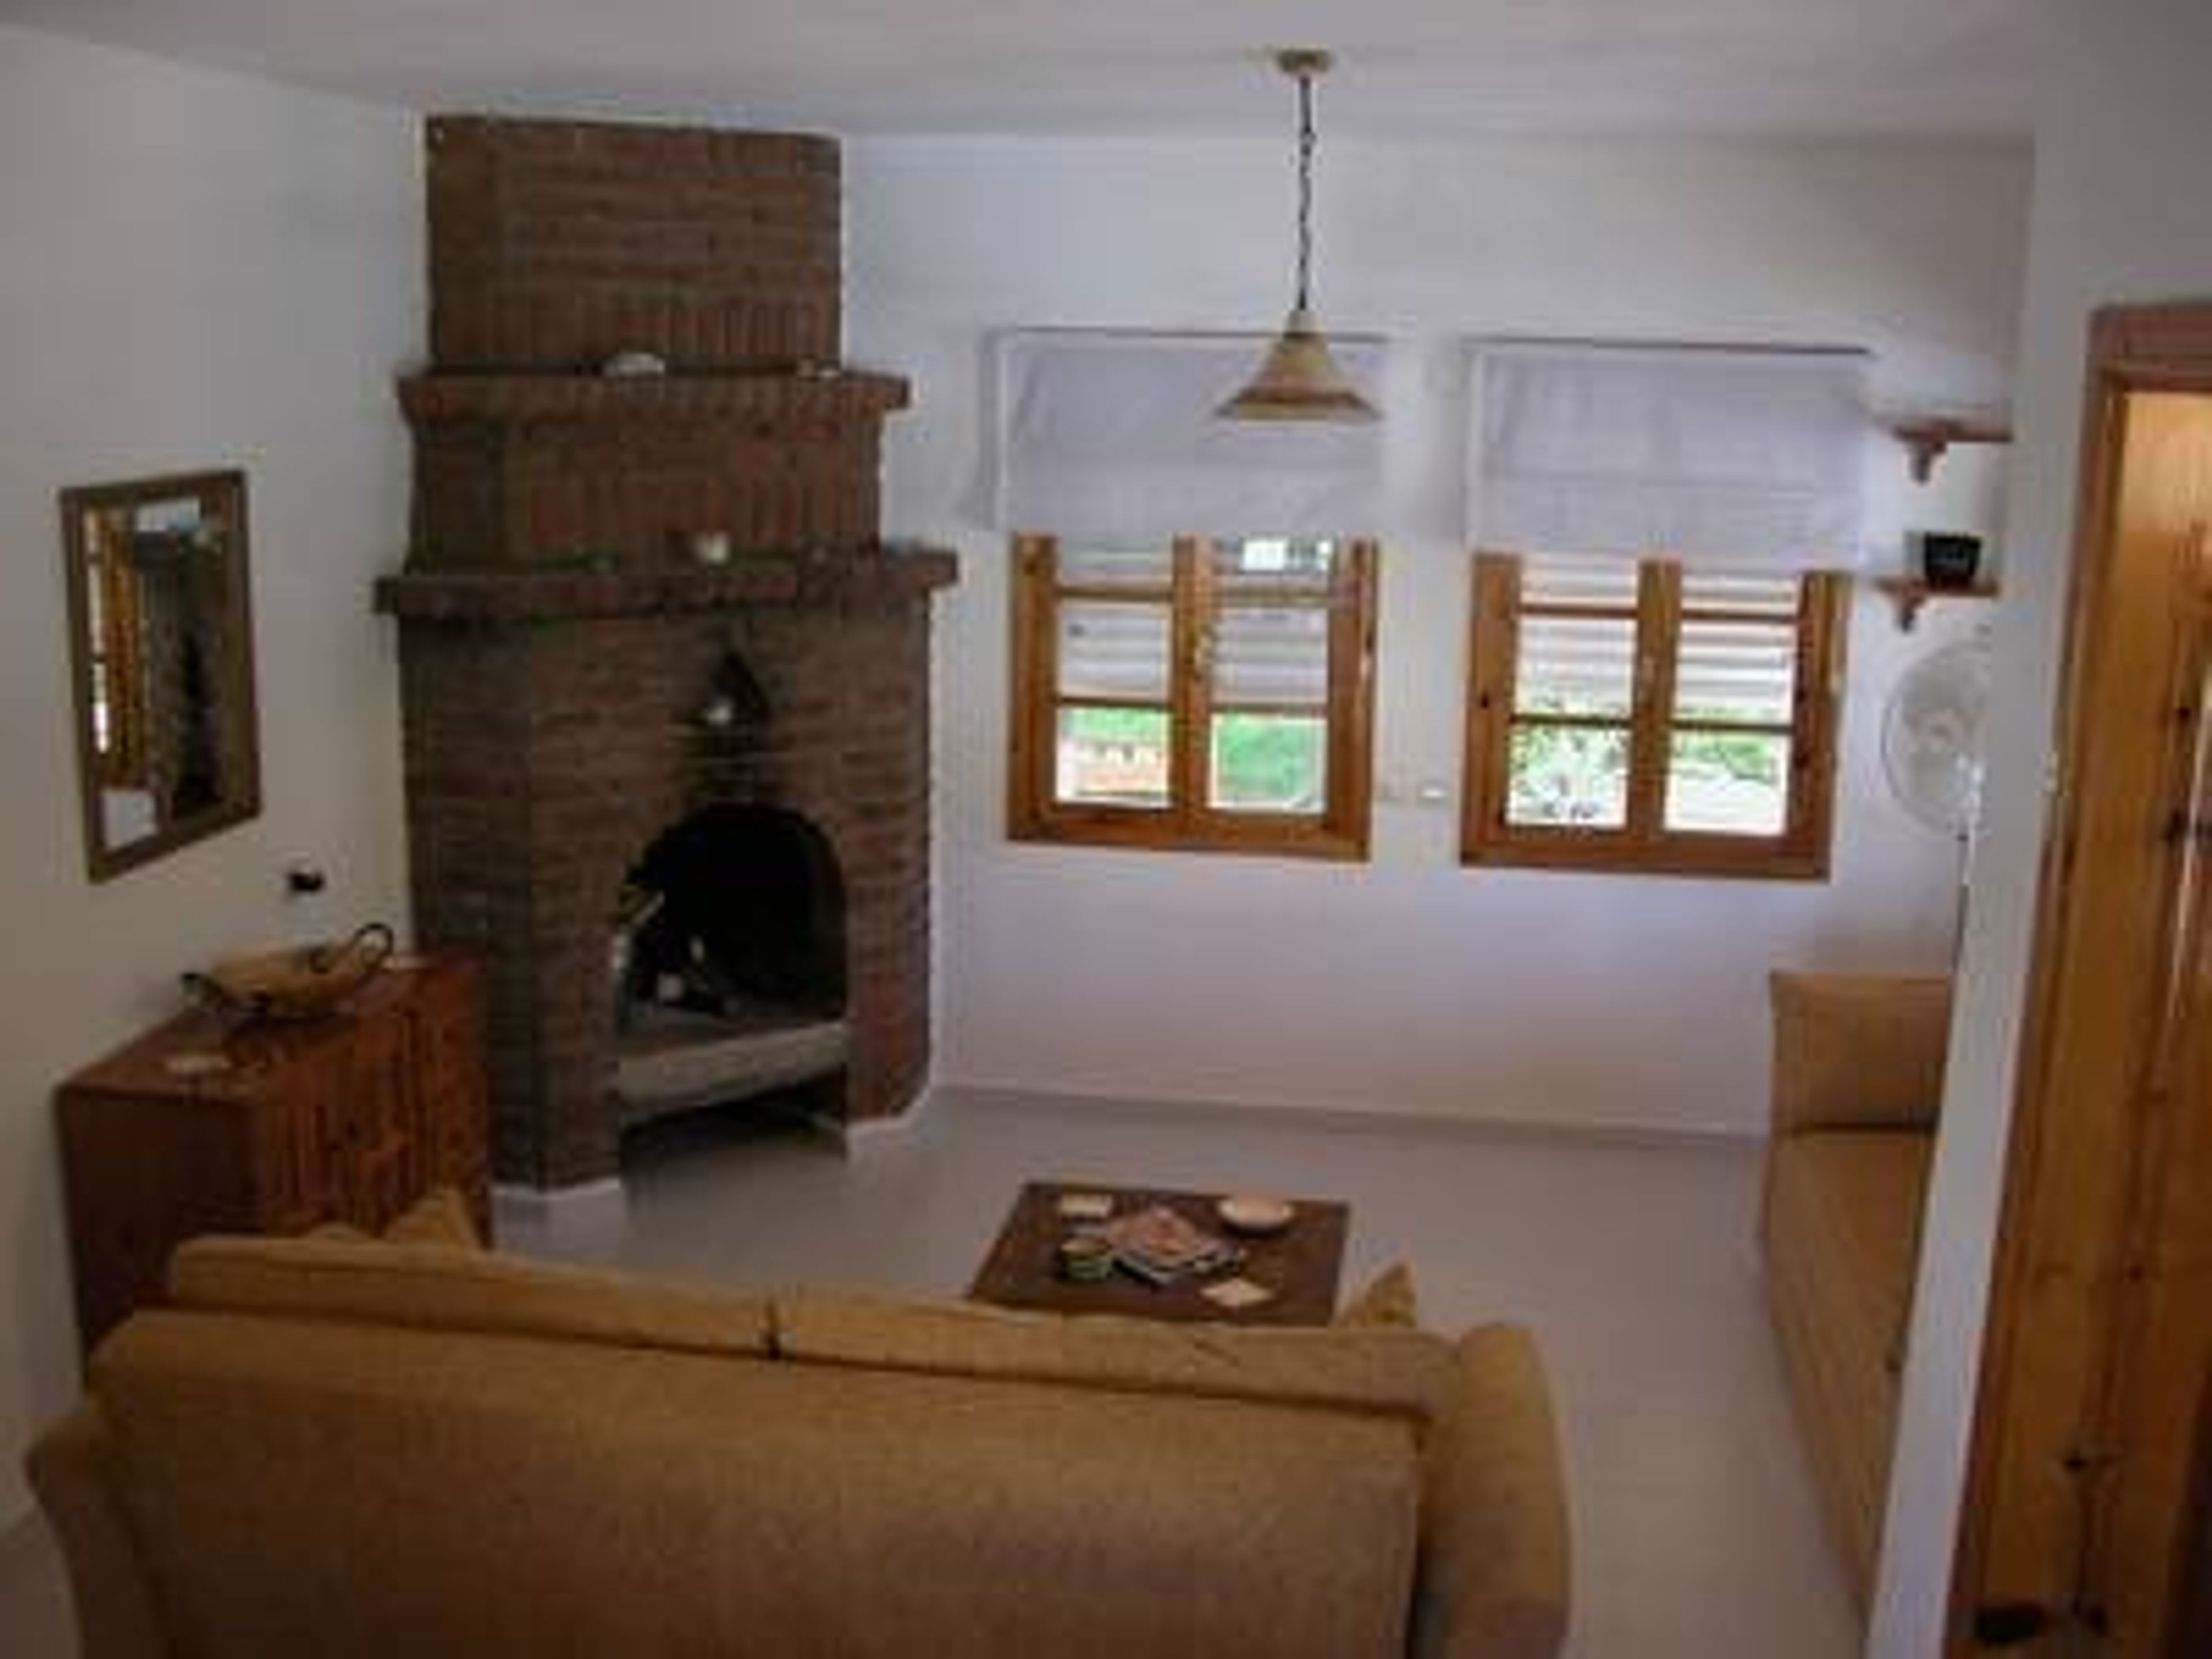 Picture of the lounge